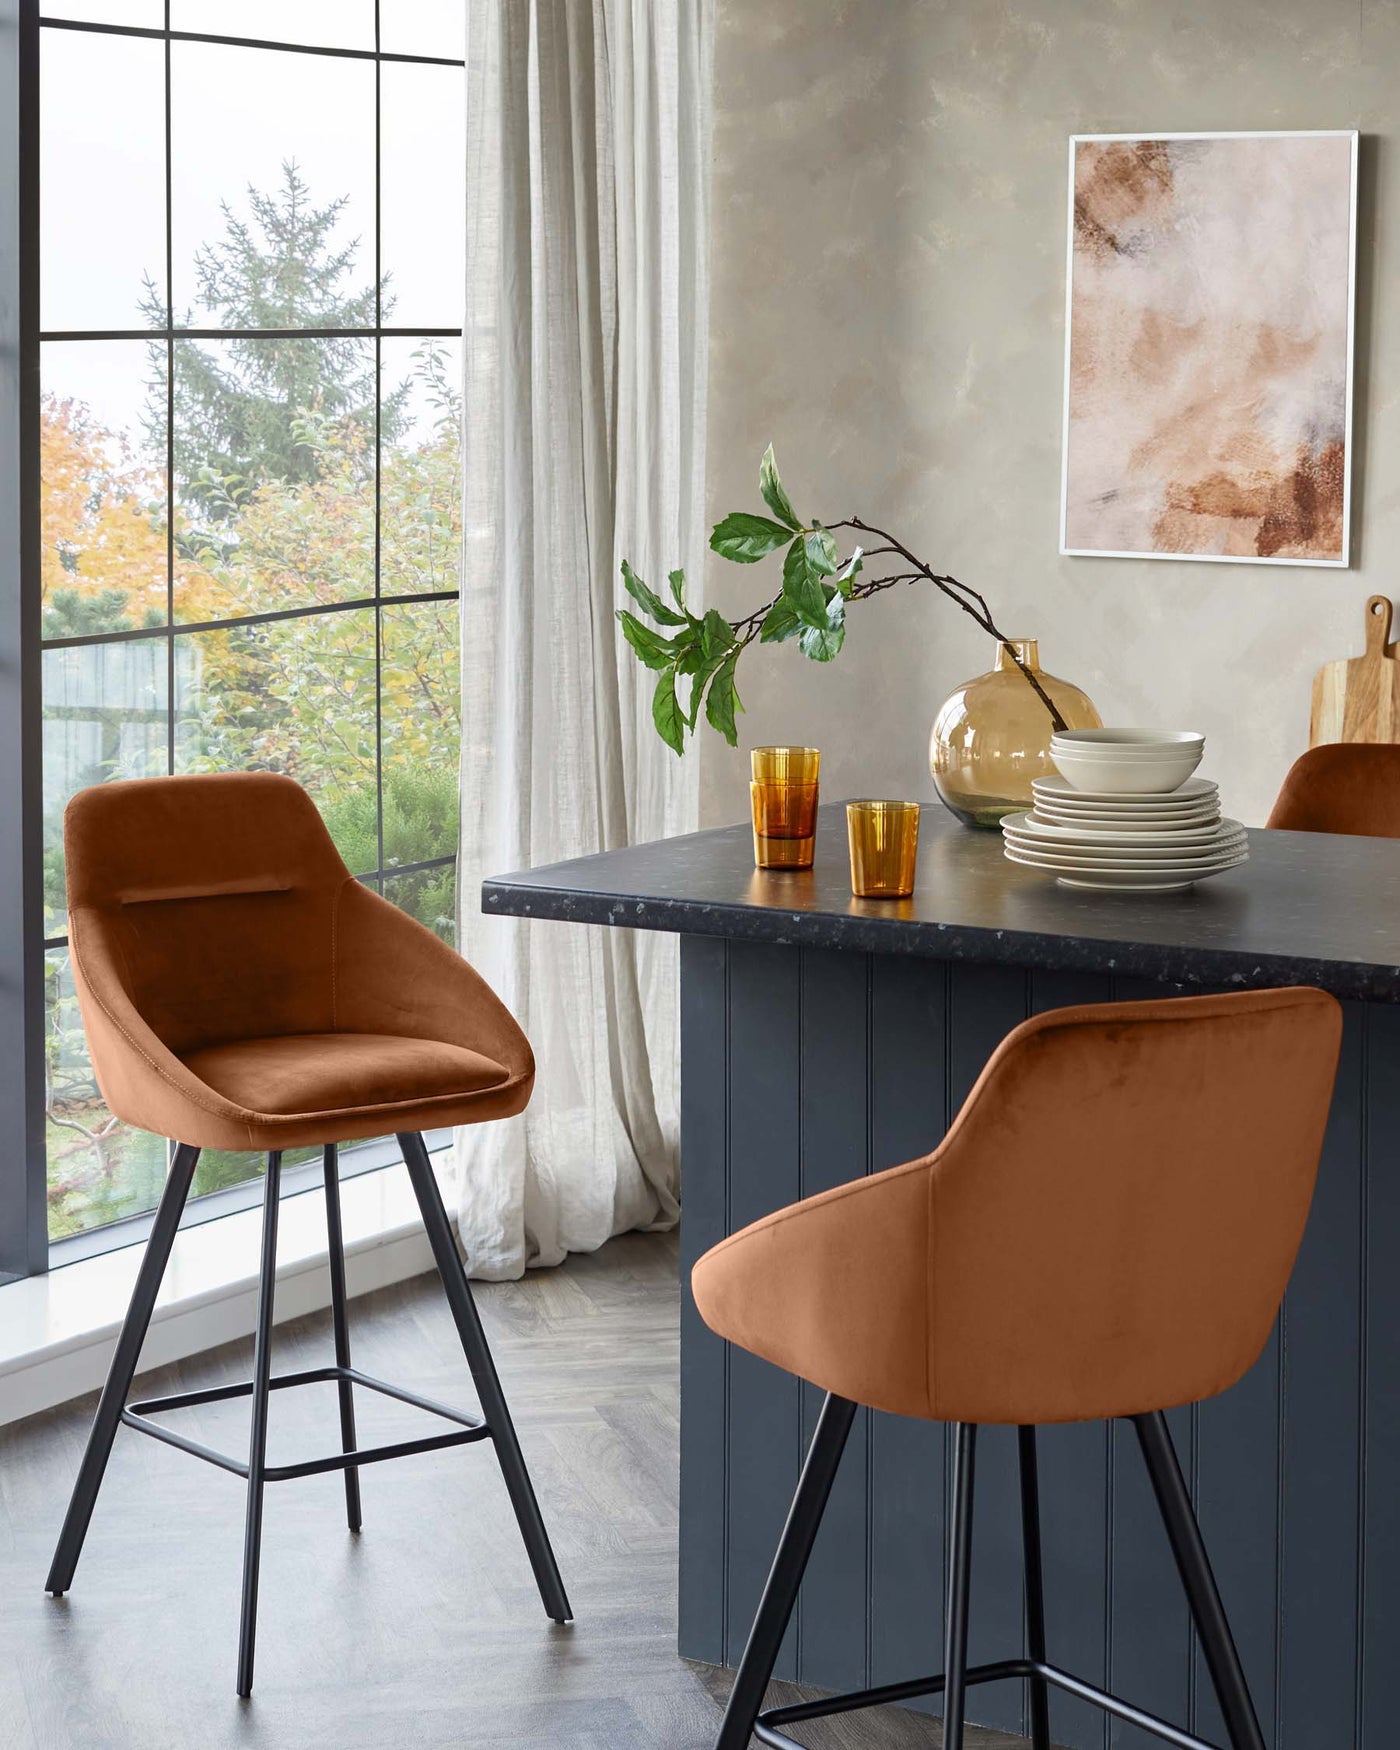 Elegant contemporary bar stools with plush, velvet upholstered seating in a rich terracotta colour, featuring a curved backrest and mounted on sleek, black metal legs with footrests, complementing a stylish black kitchen island with a textured finish.